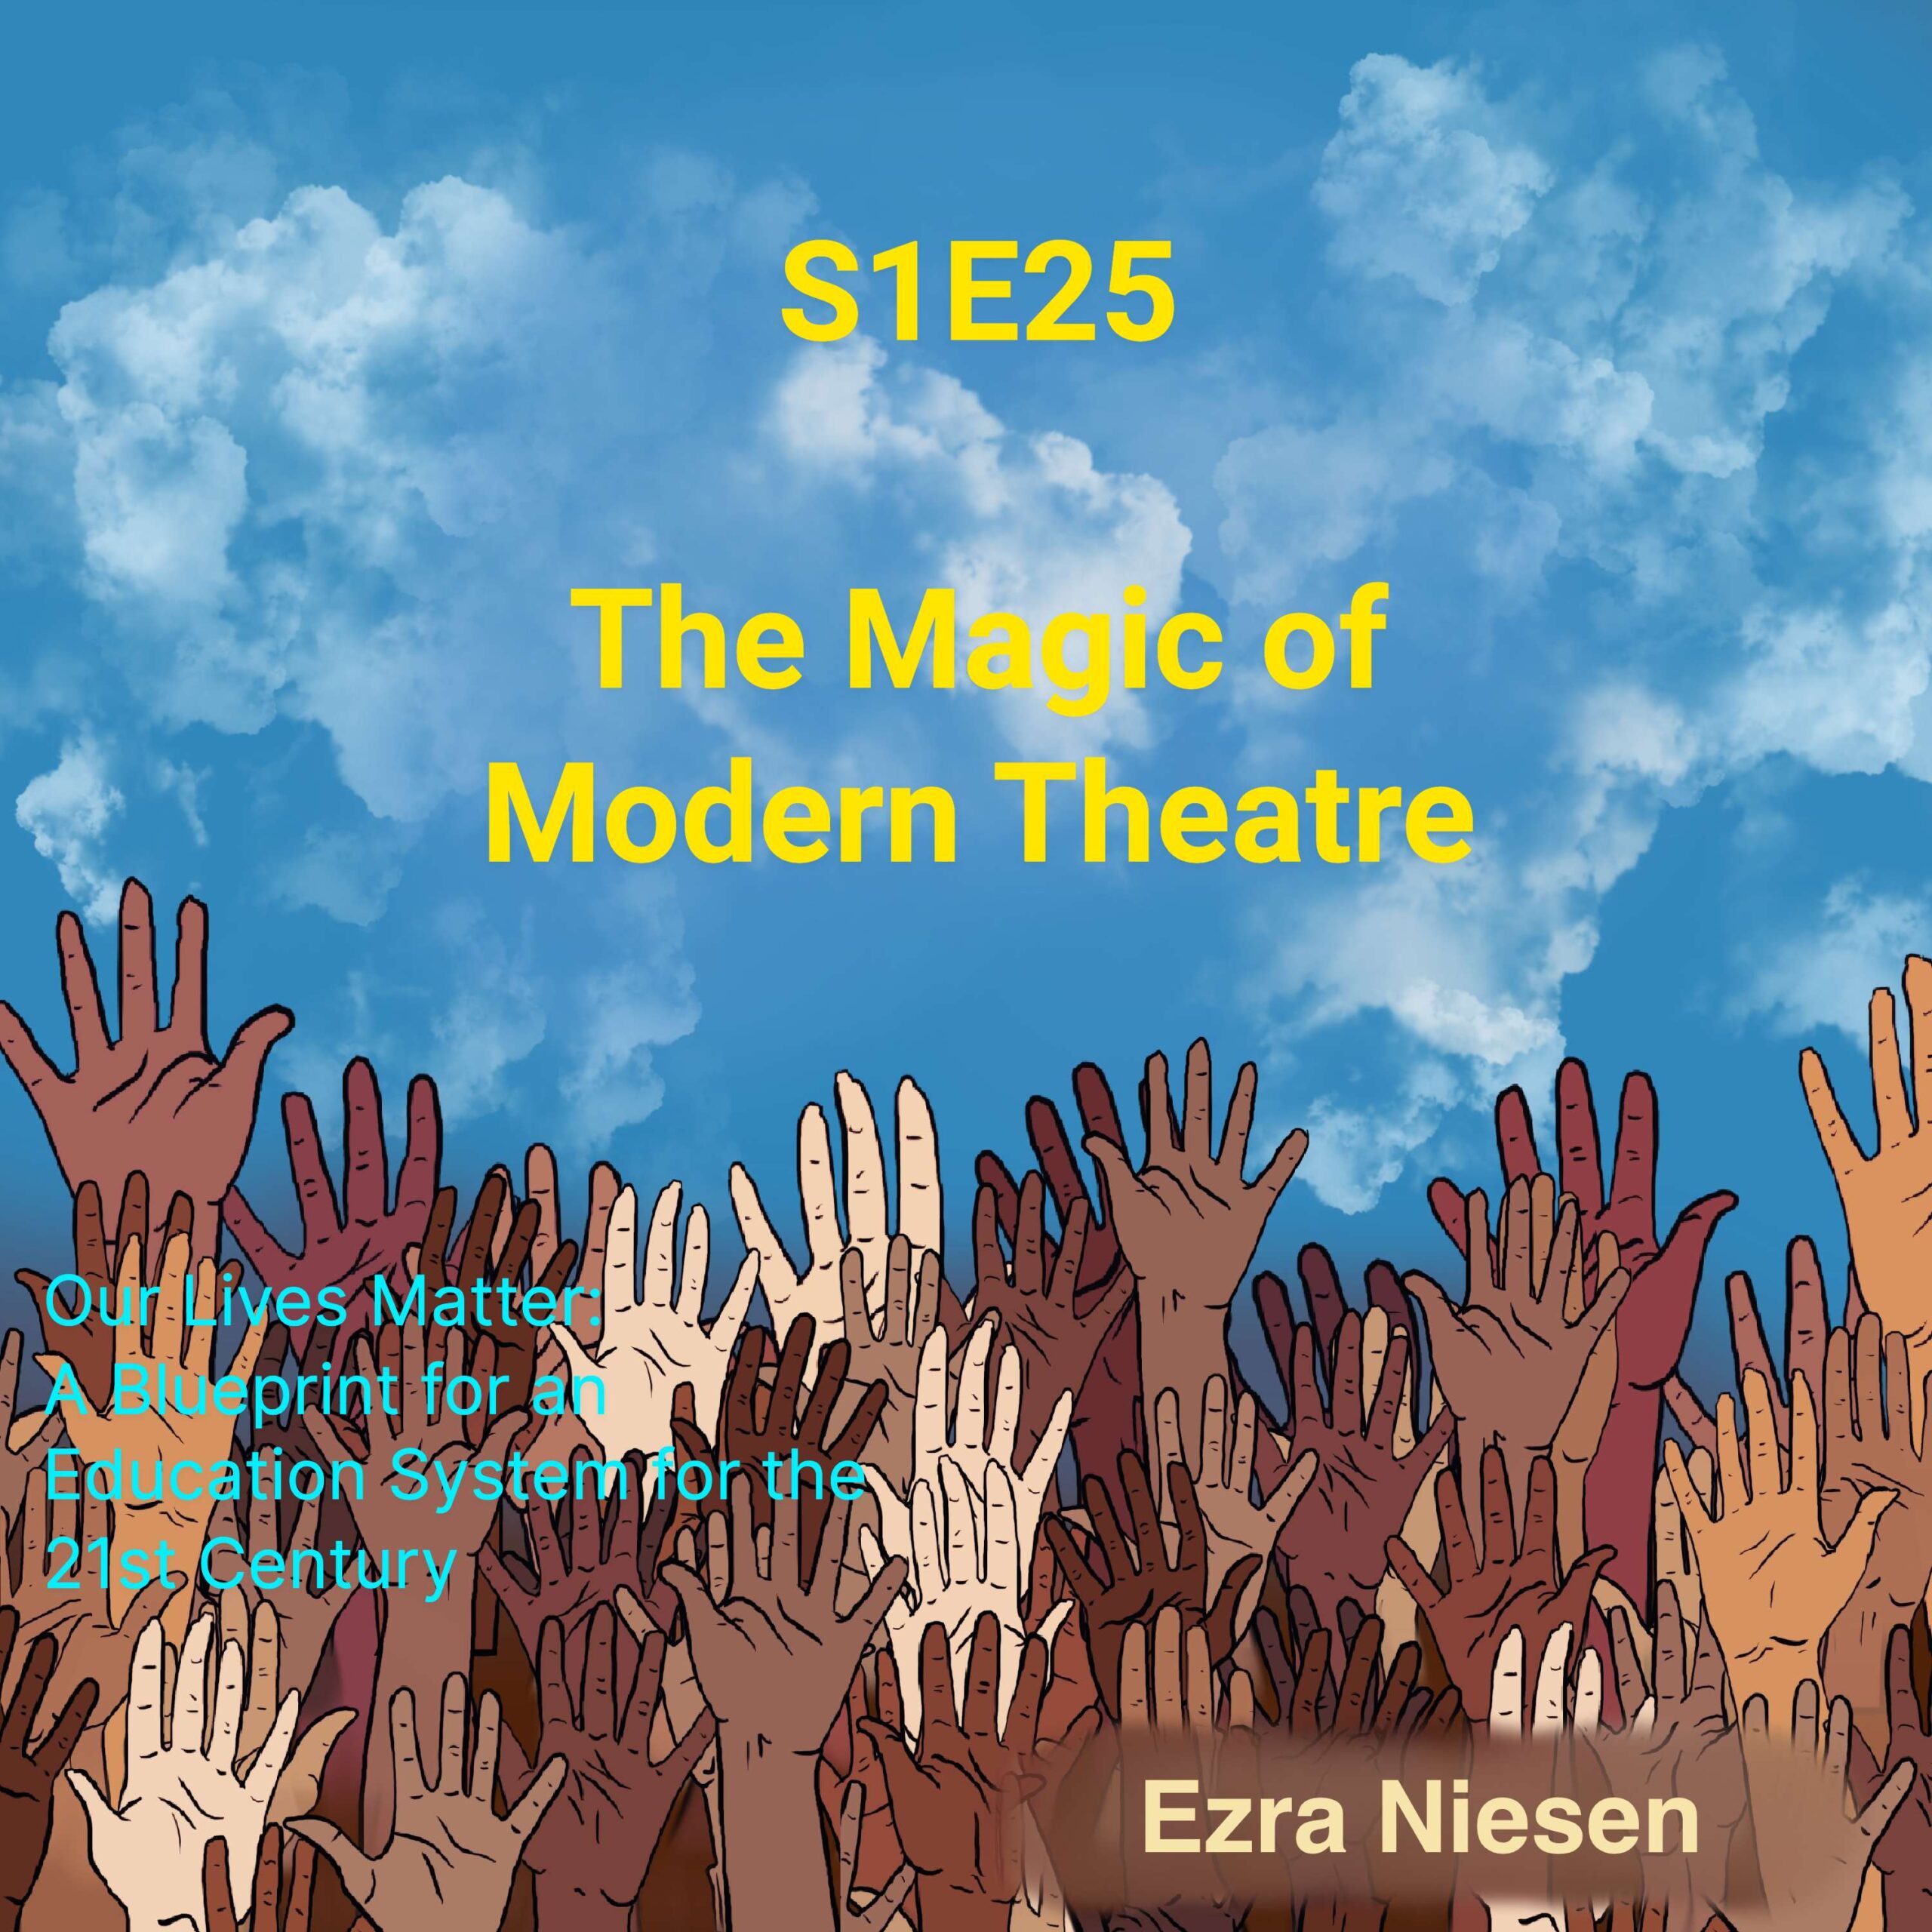 Our Lives Matter S1E25:  The Magic of Modern Theatre